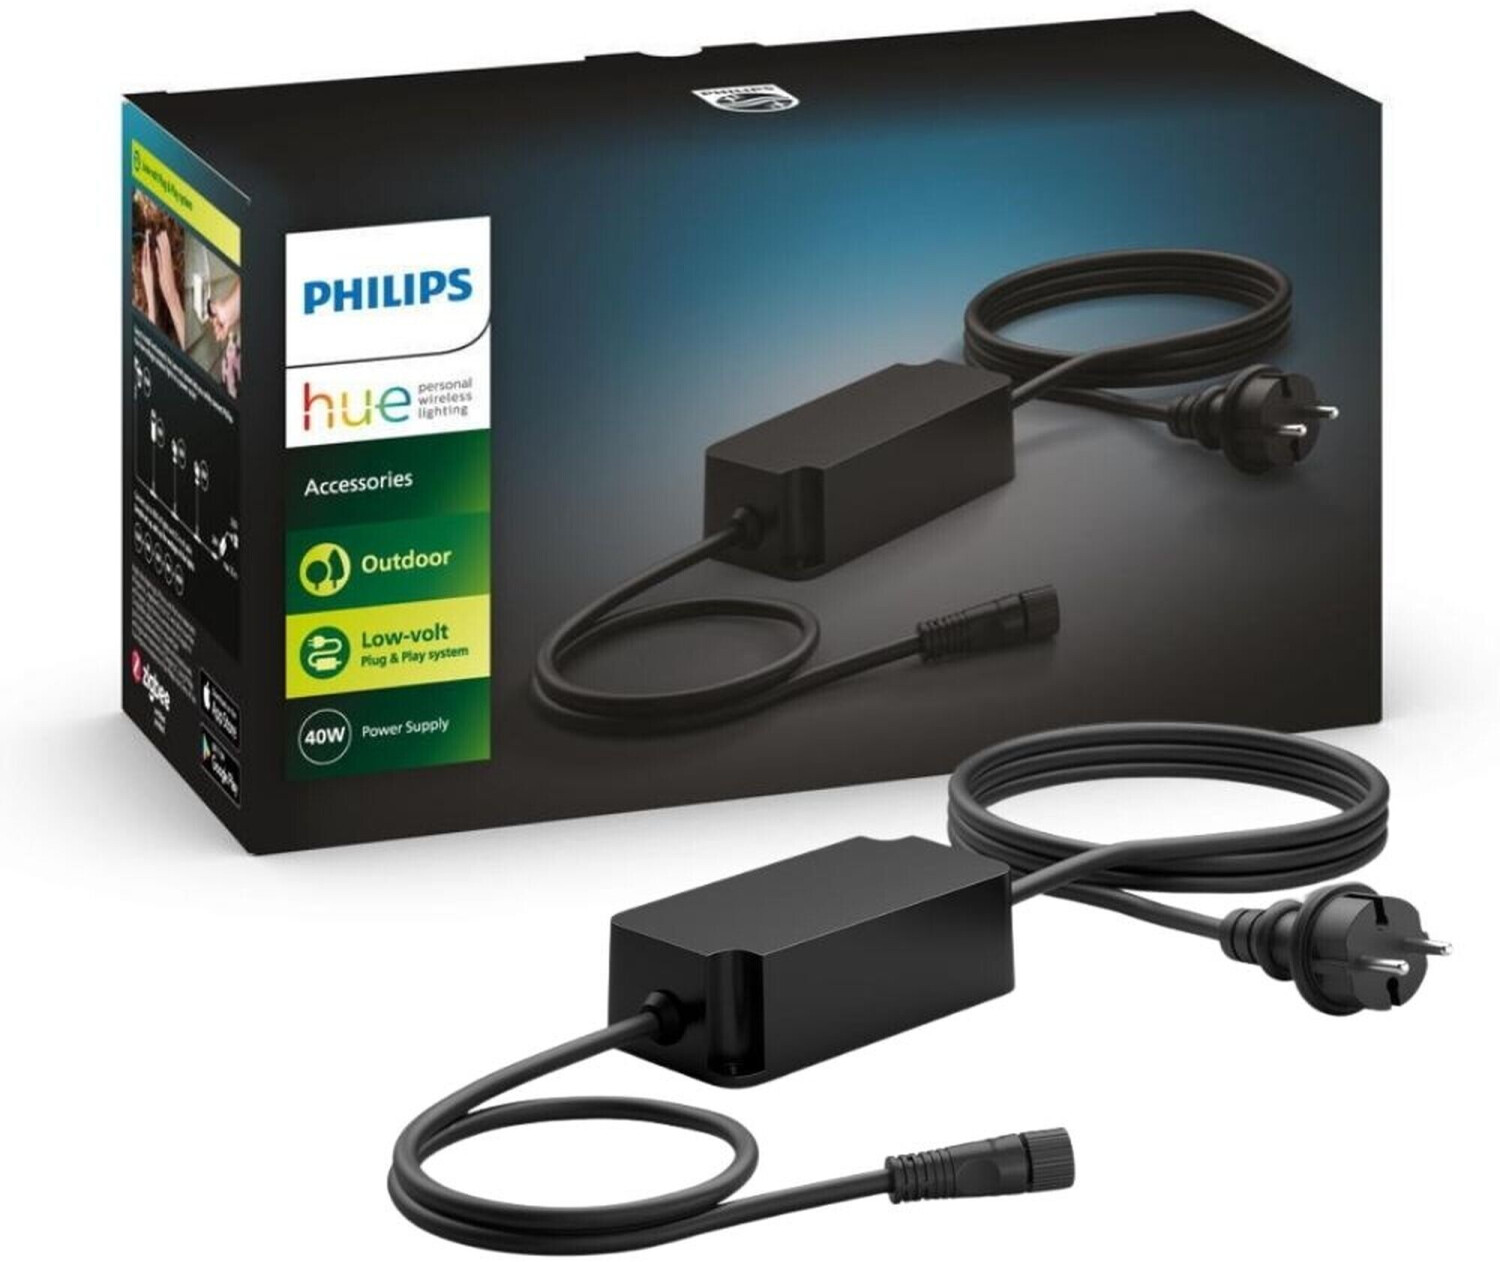 Philips Hue Outdoor Netzteil 40W 24V IP67 (929003149201) ab 41,84 €